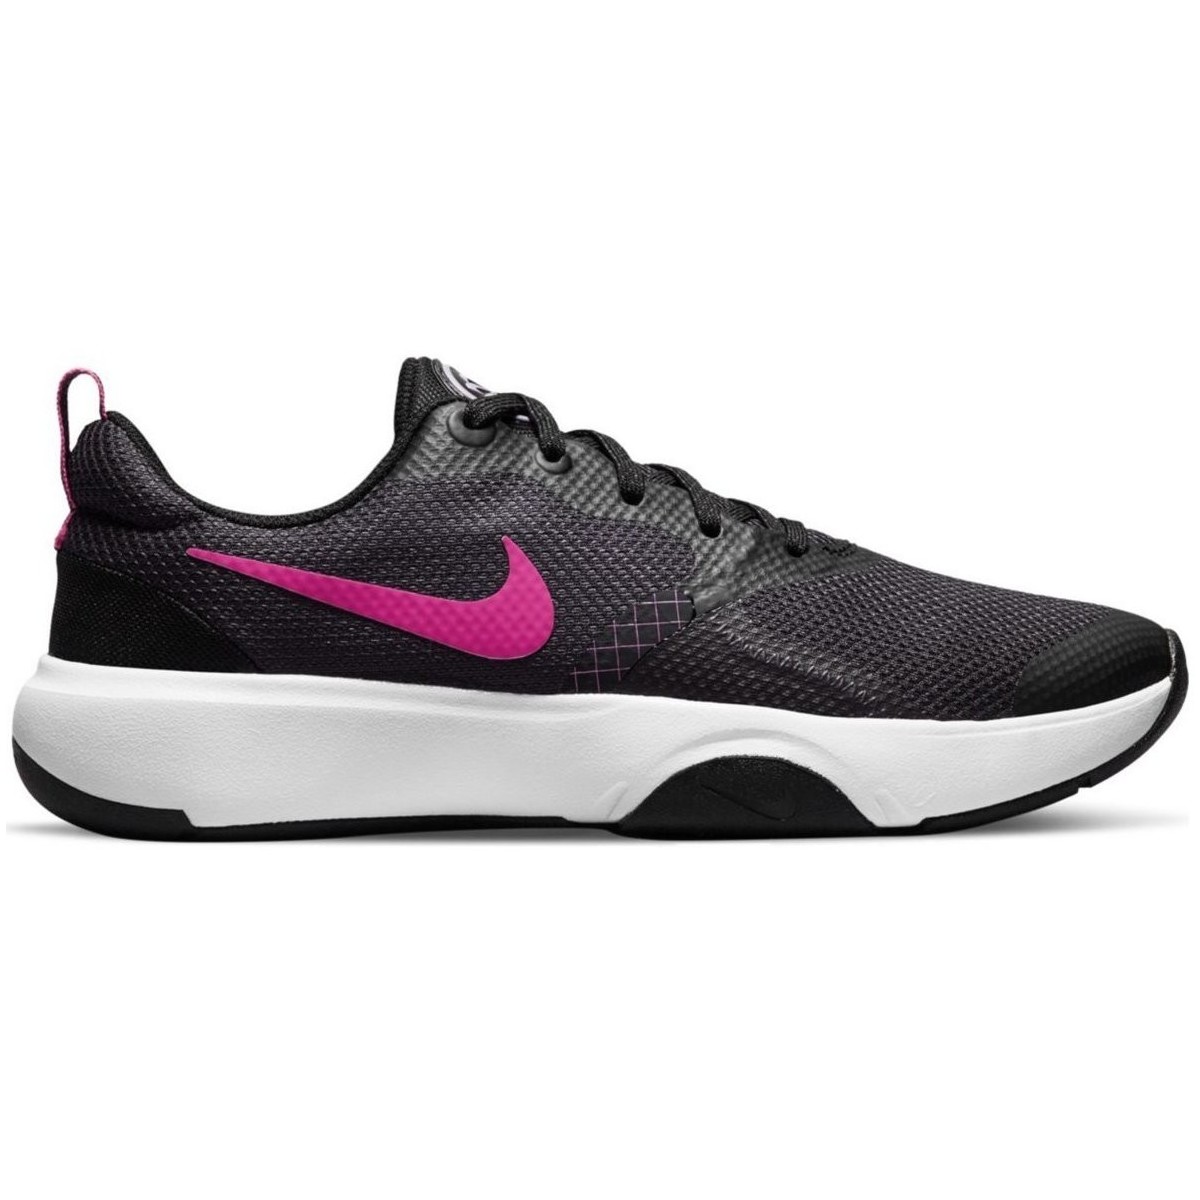 Chaussures Femme Fitness / Training Nike  Gris